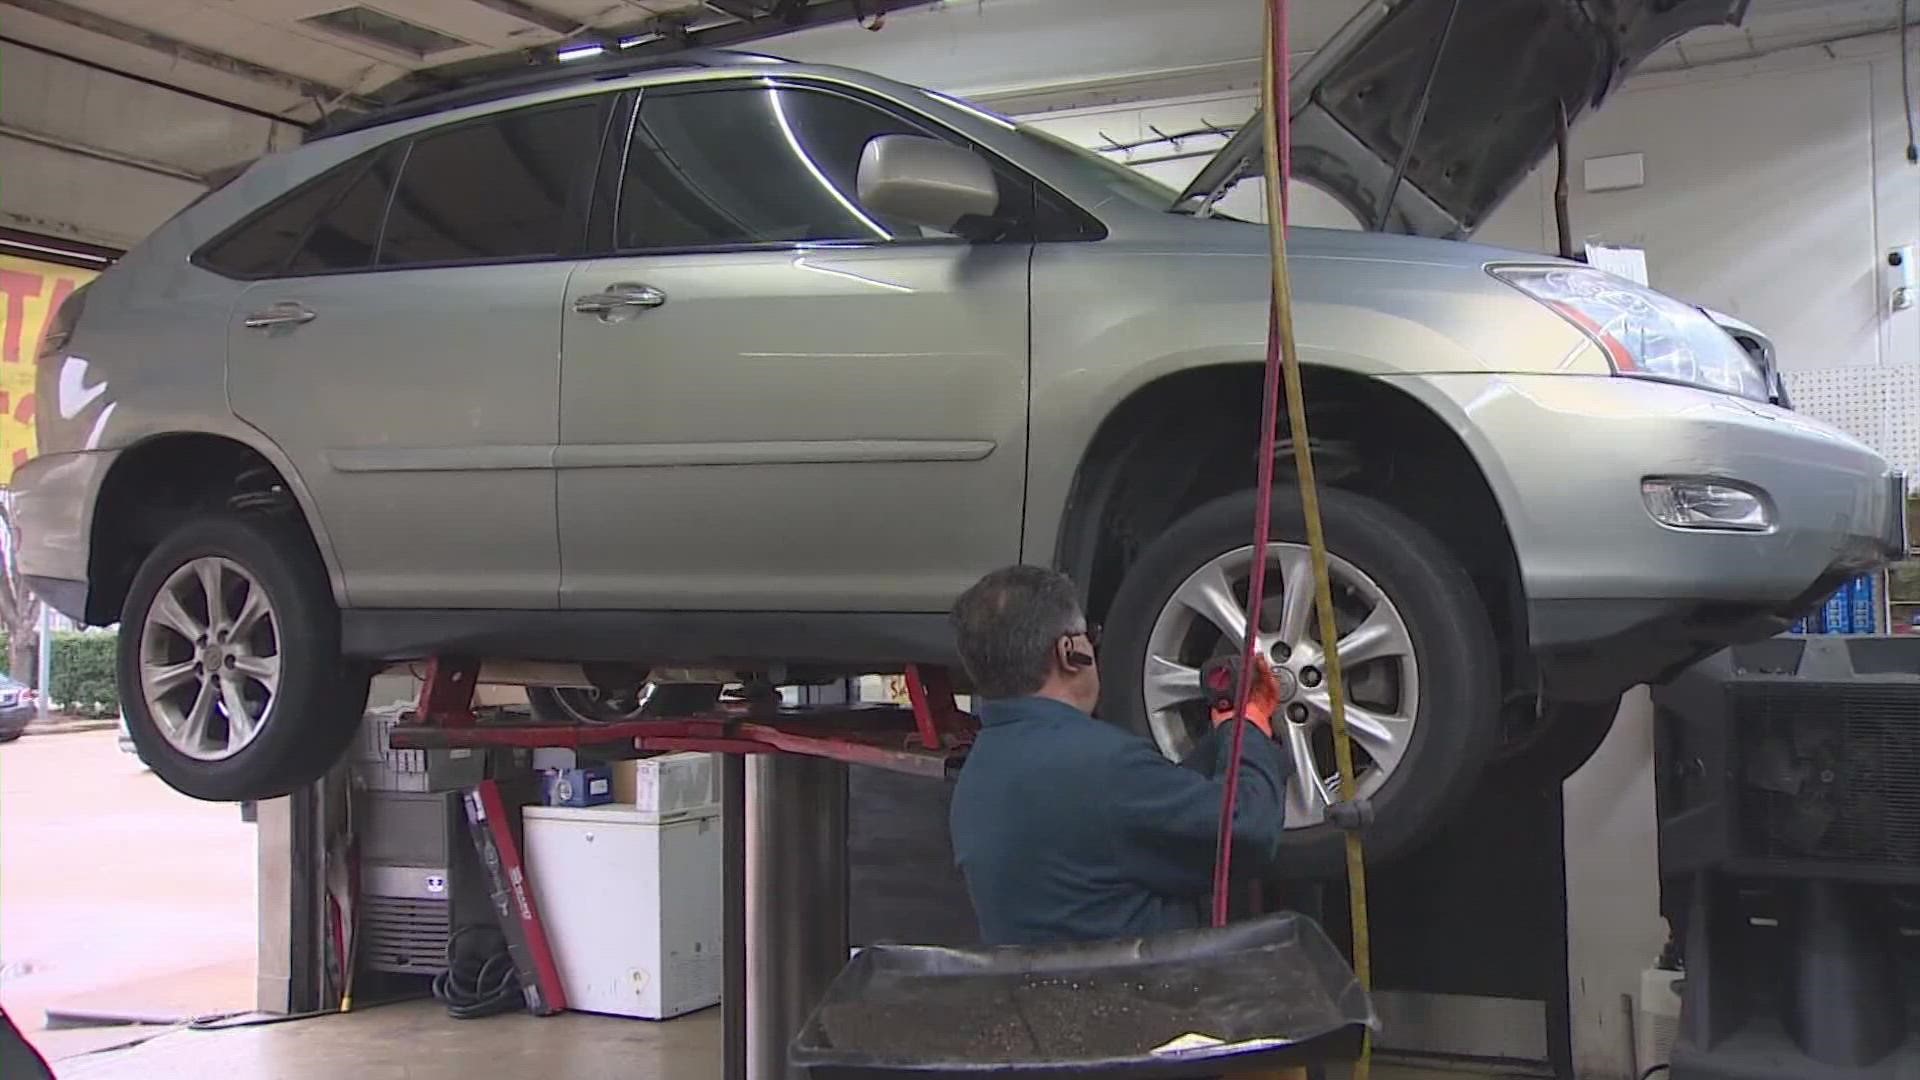 Nearly half of the cars on the road in the U.S. need maintenance, according to a CARFAX report.